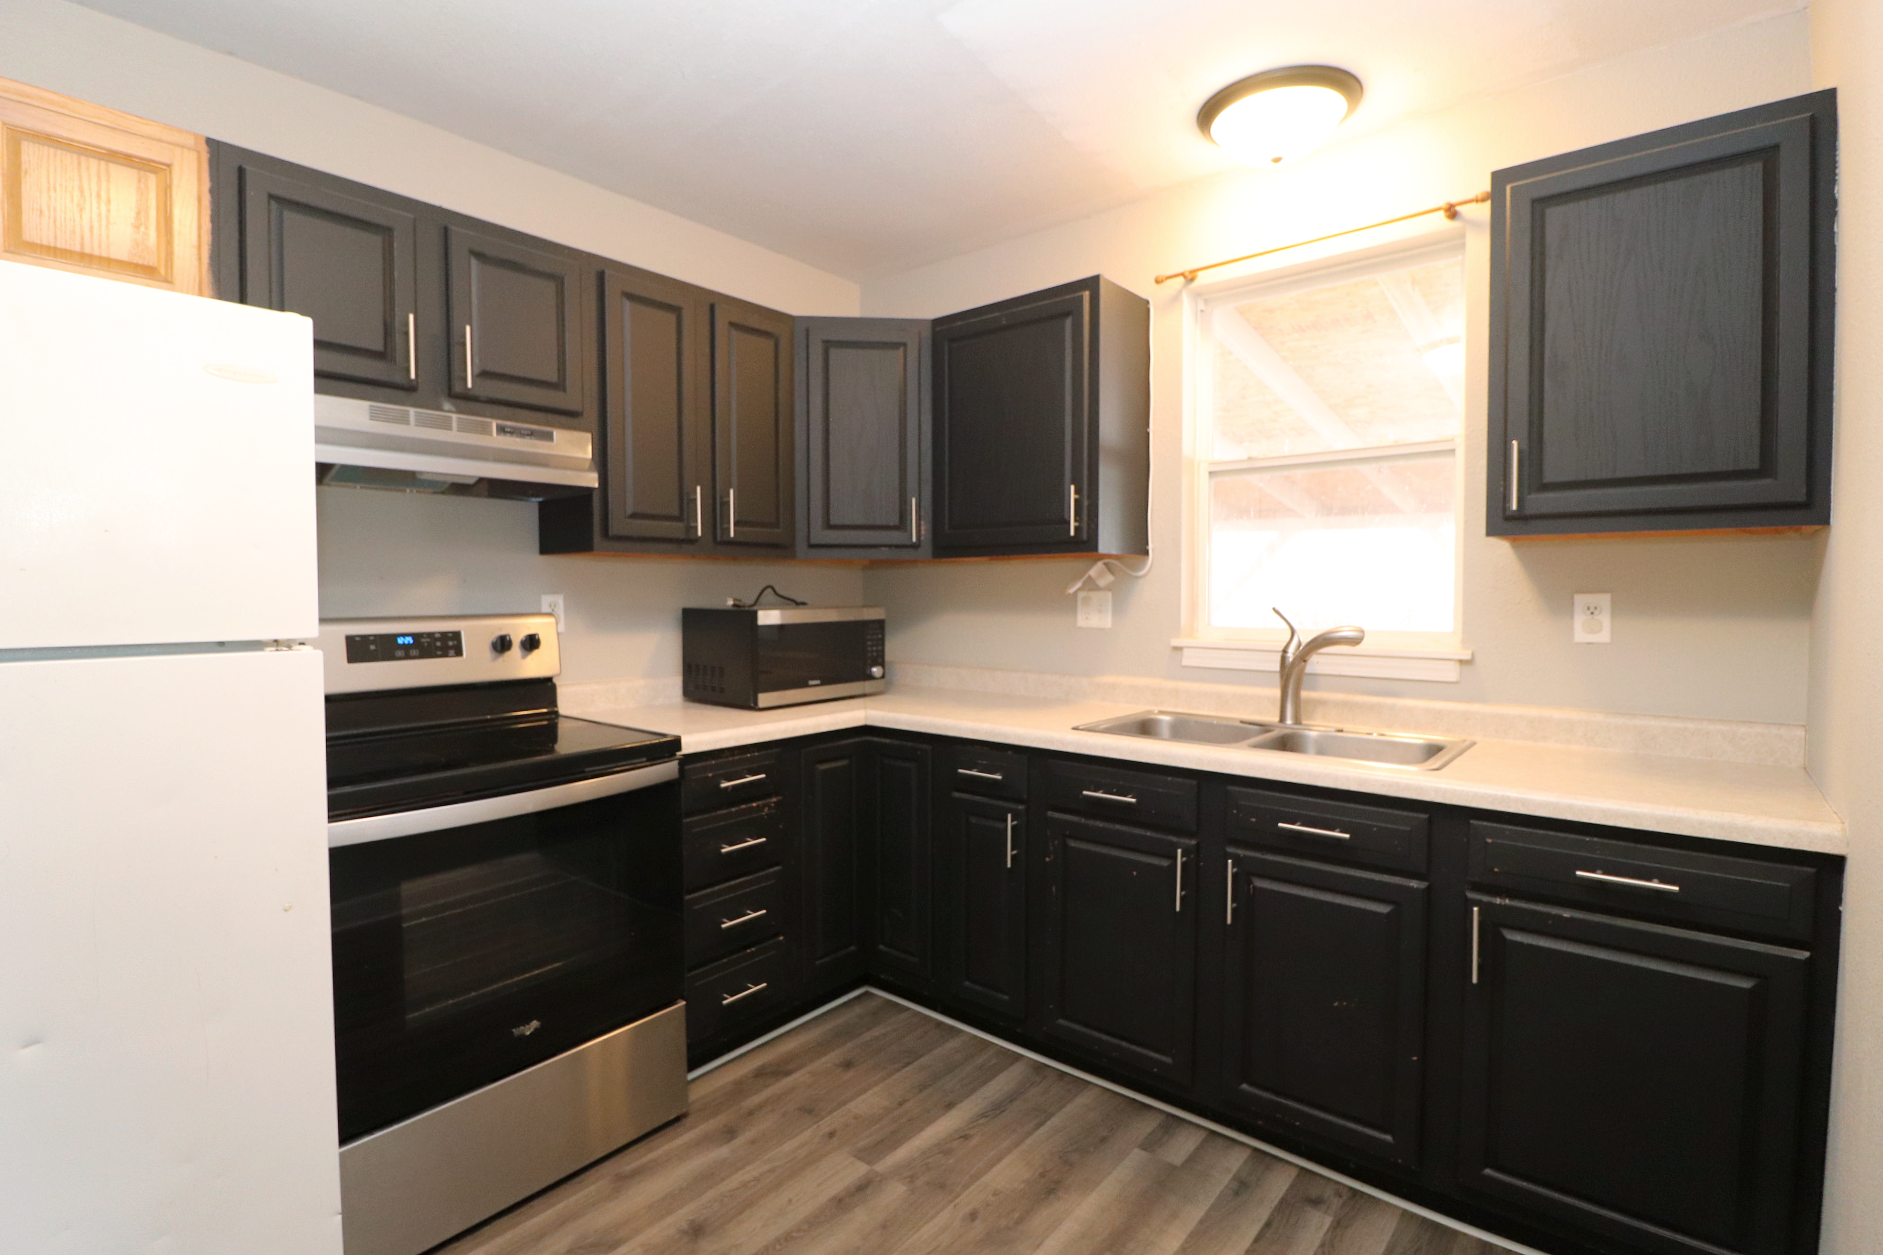 kitchen with black cabinets, updated laminate flooring